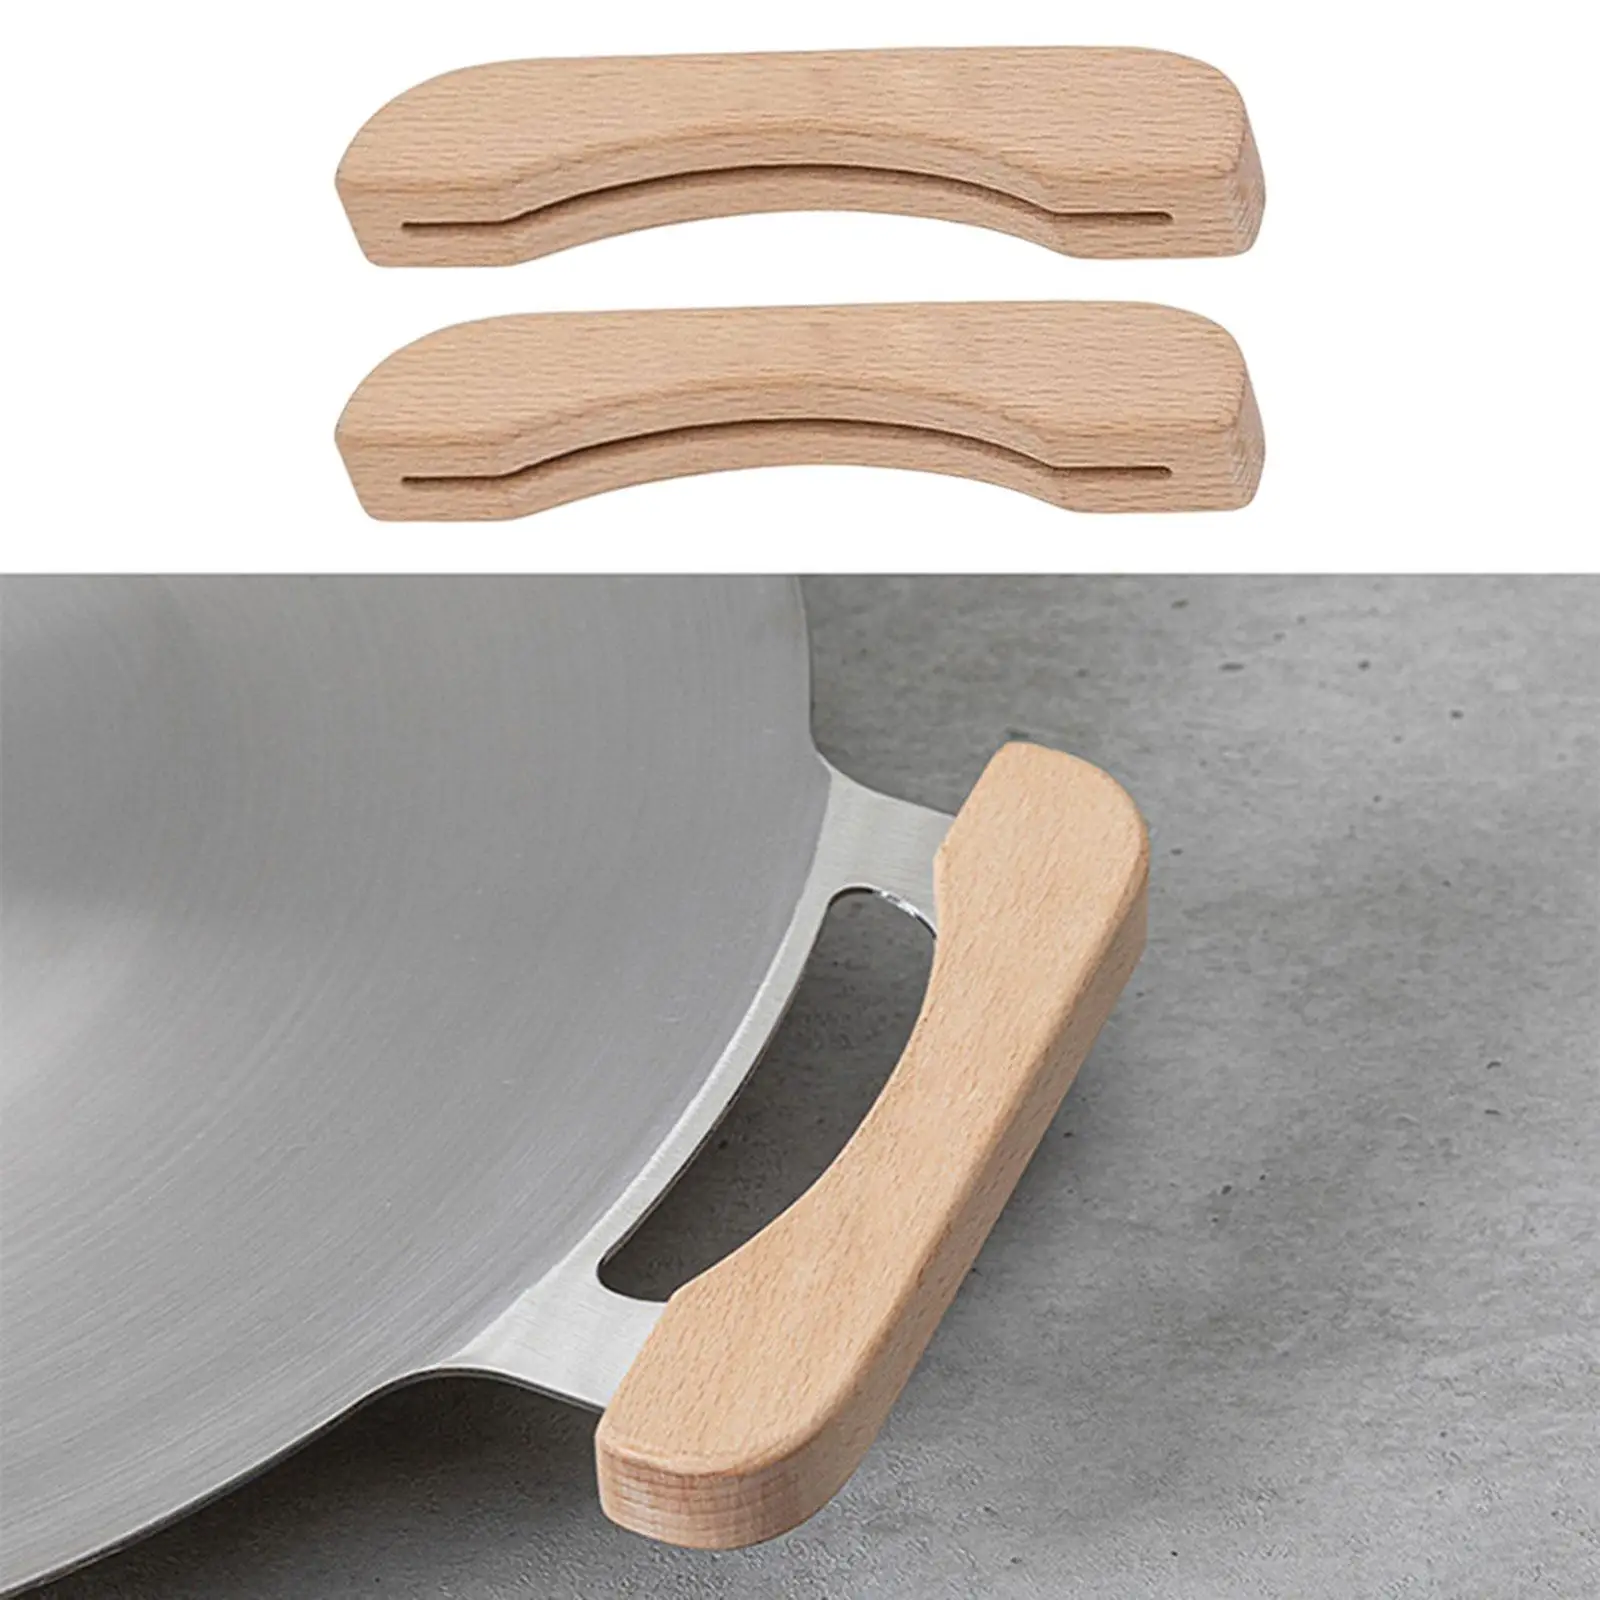 2Pcs Wooden BBQ Barbecue Pan Handle Replacement Scald for Pot Griddle